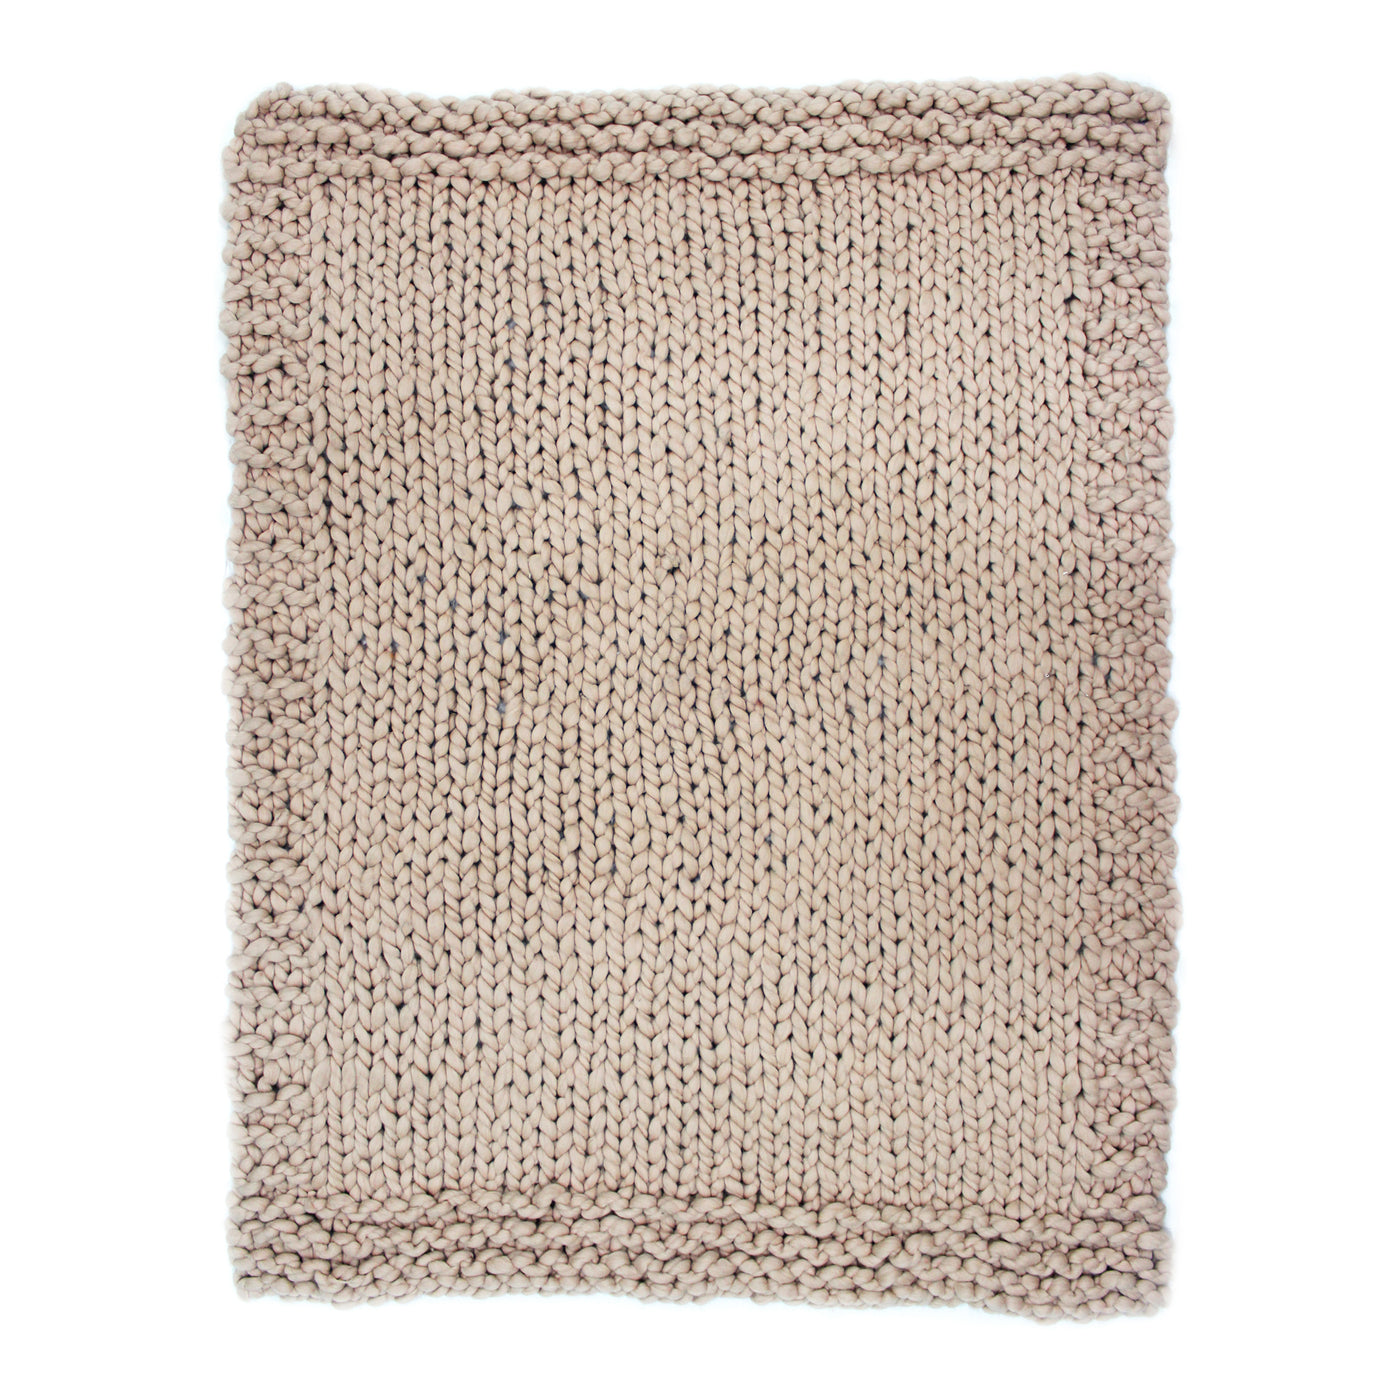 A thick knit throw for cooler nights and snowy weekends. Made of 100% wool, the Abuela Throw keeps you warm throughout the...